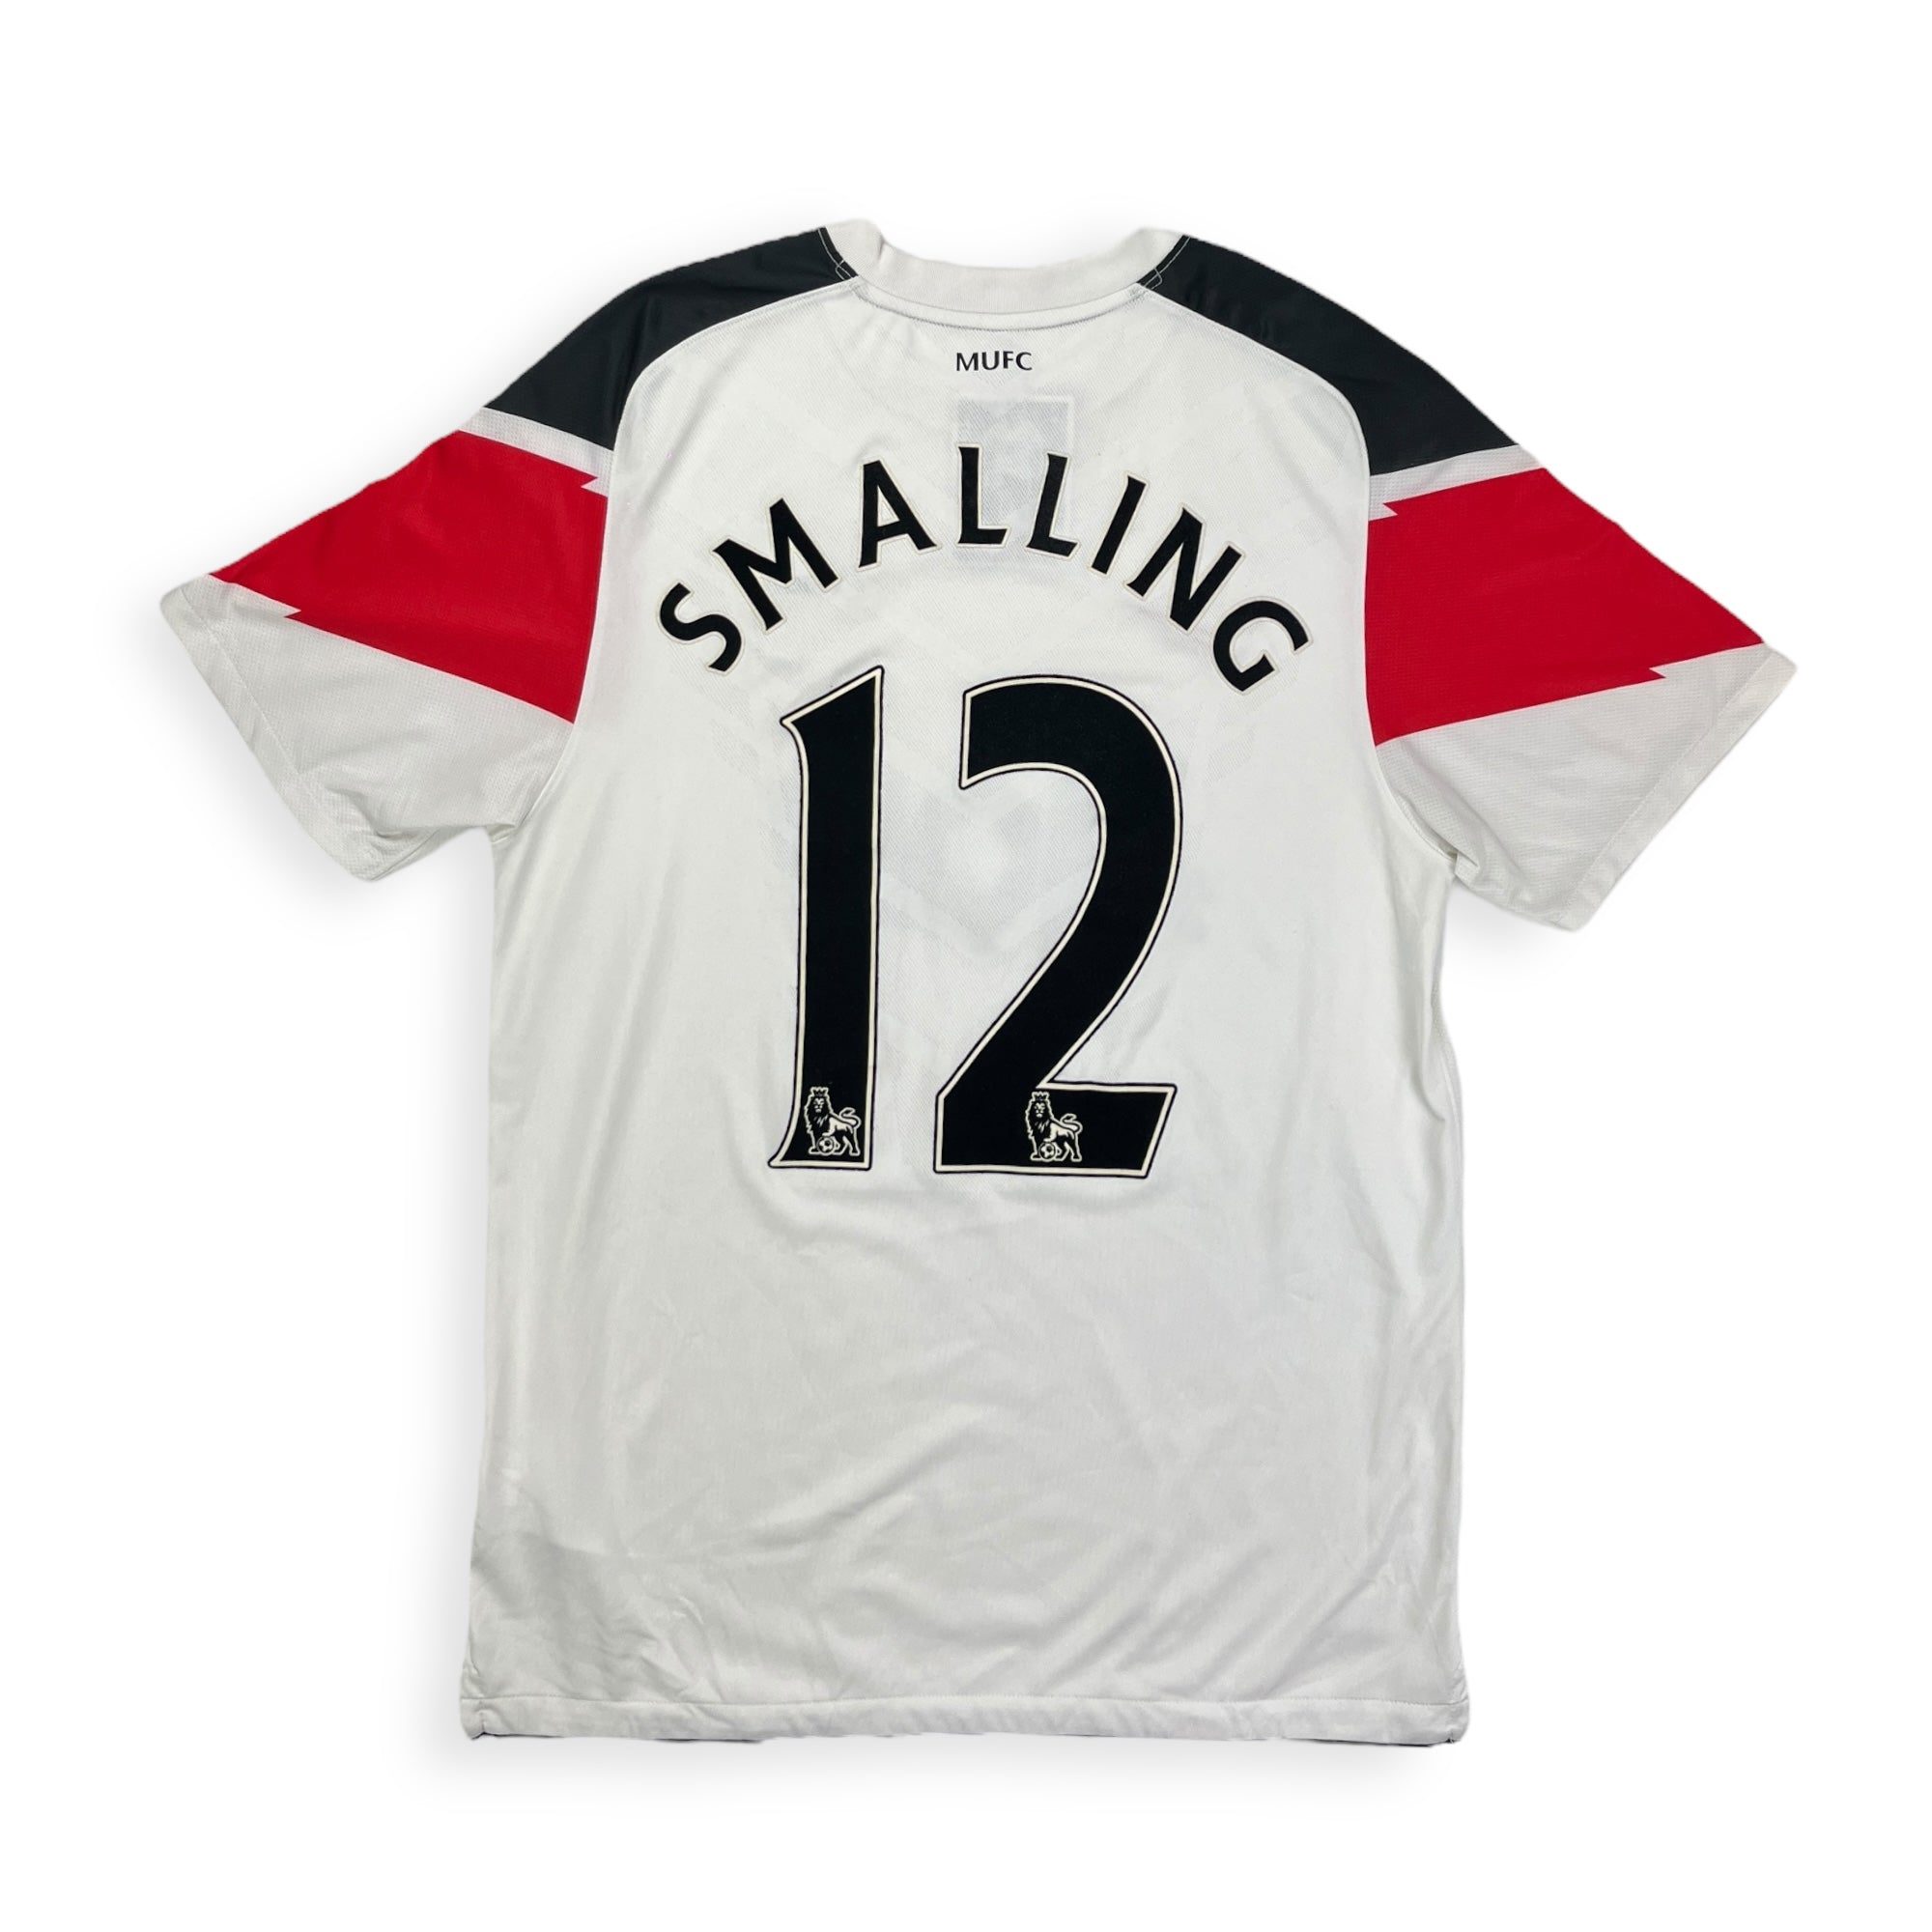 Manchester United 2010 Away Shirt, Smalling 12